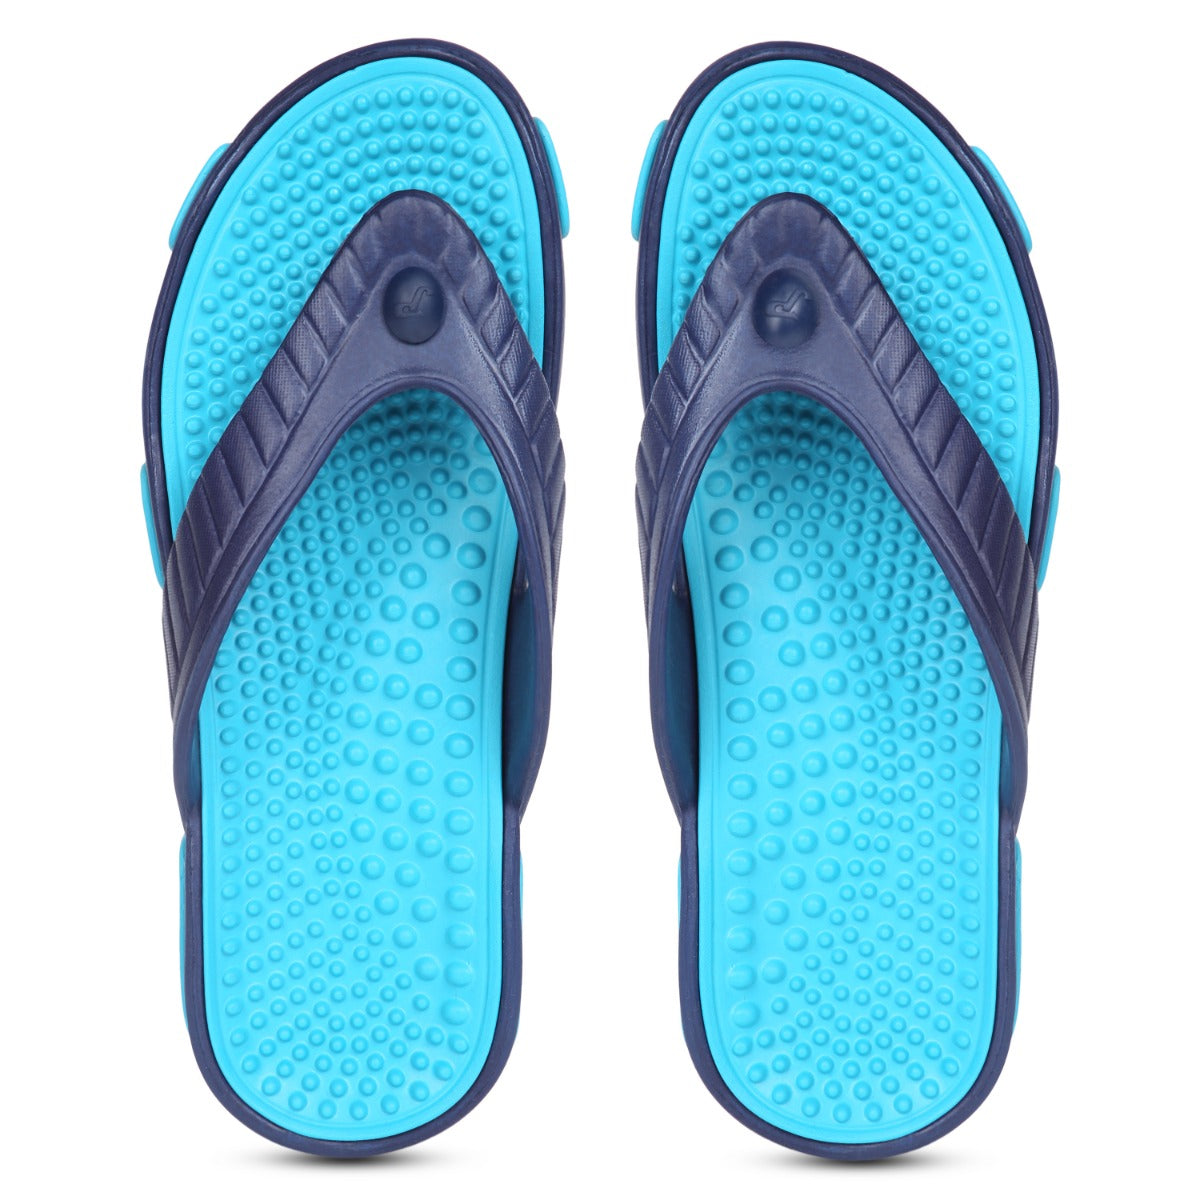 Paragon EVK3404G Men Stylish Lightweight Flipflops | Comfortable with Anti skid soles | Casual &amp; Trendy Slippers | Indoor &amp; Outdoor